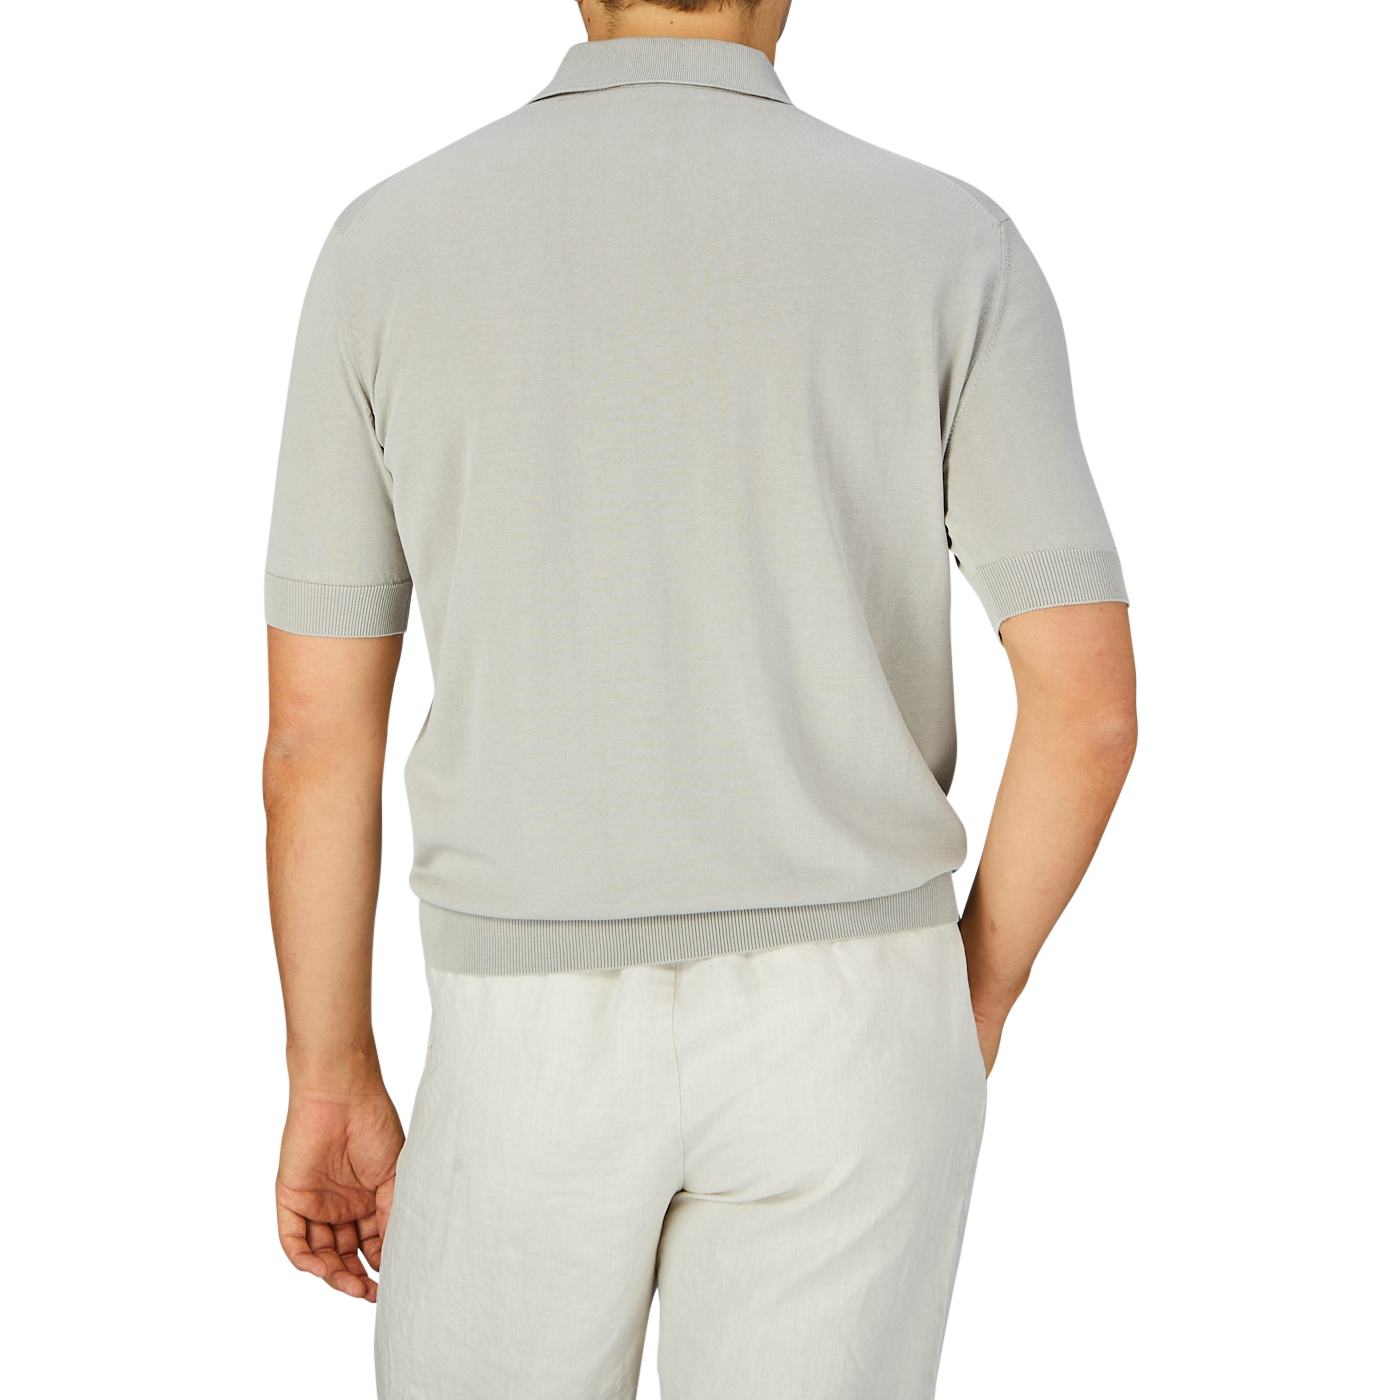 Man standing with his back to the camera wearing a slim fit Nebbia Grey Crepe Cotton Polo Shirt by Filippo de Laurentiis and white pants.